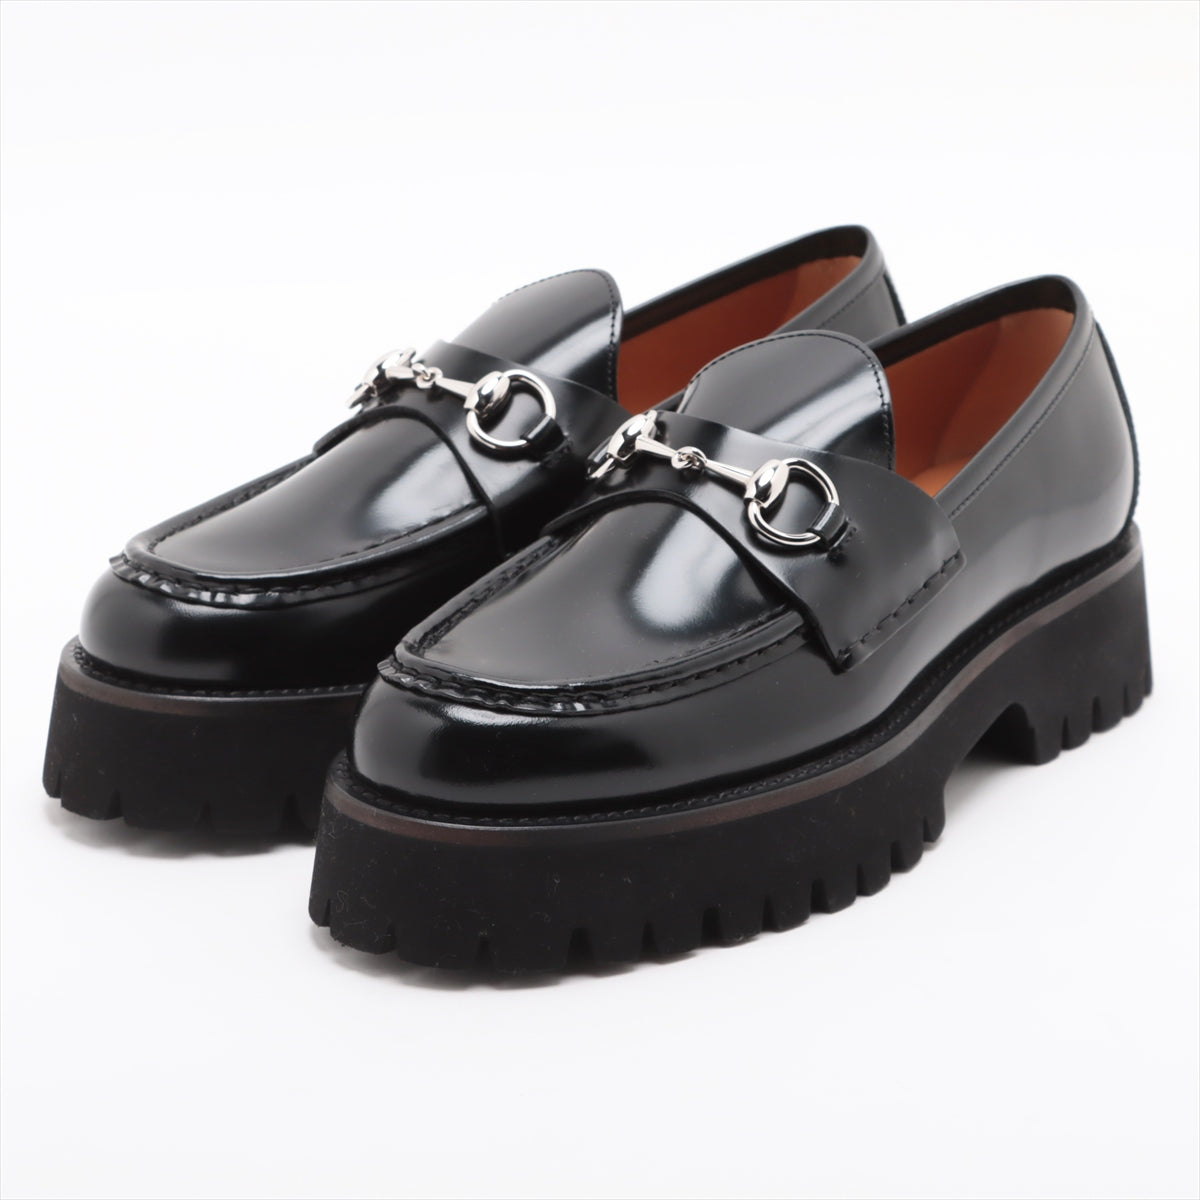 Gucci Leather Loafer 39 Ladies' Black 764211 Horse Bits